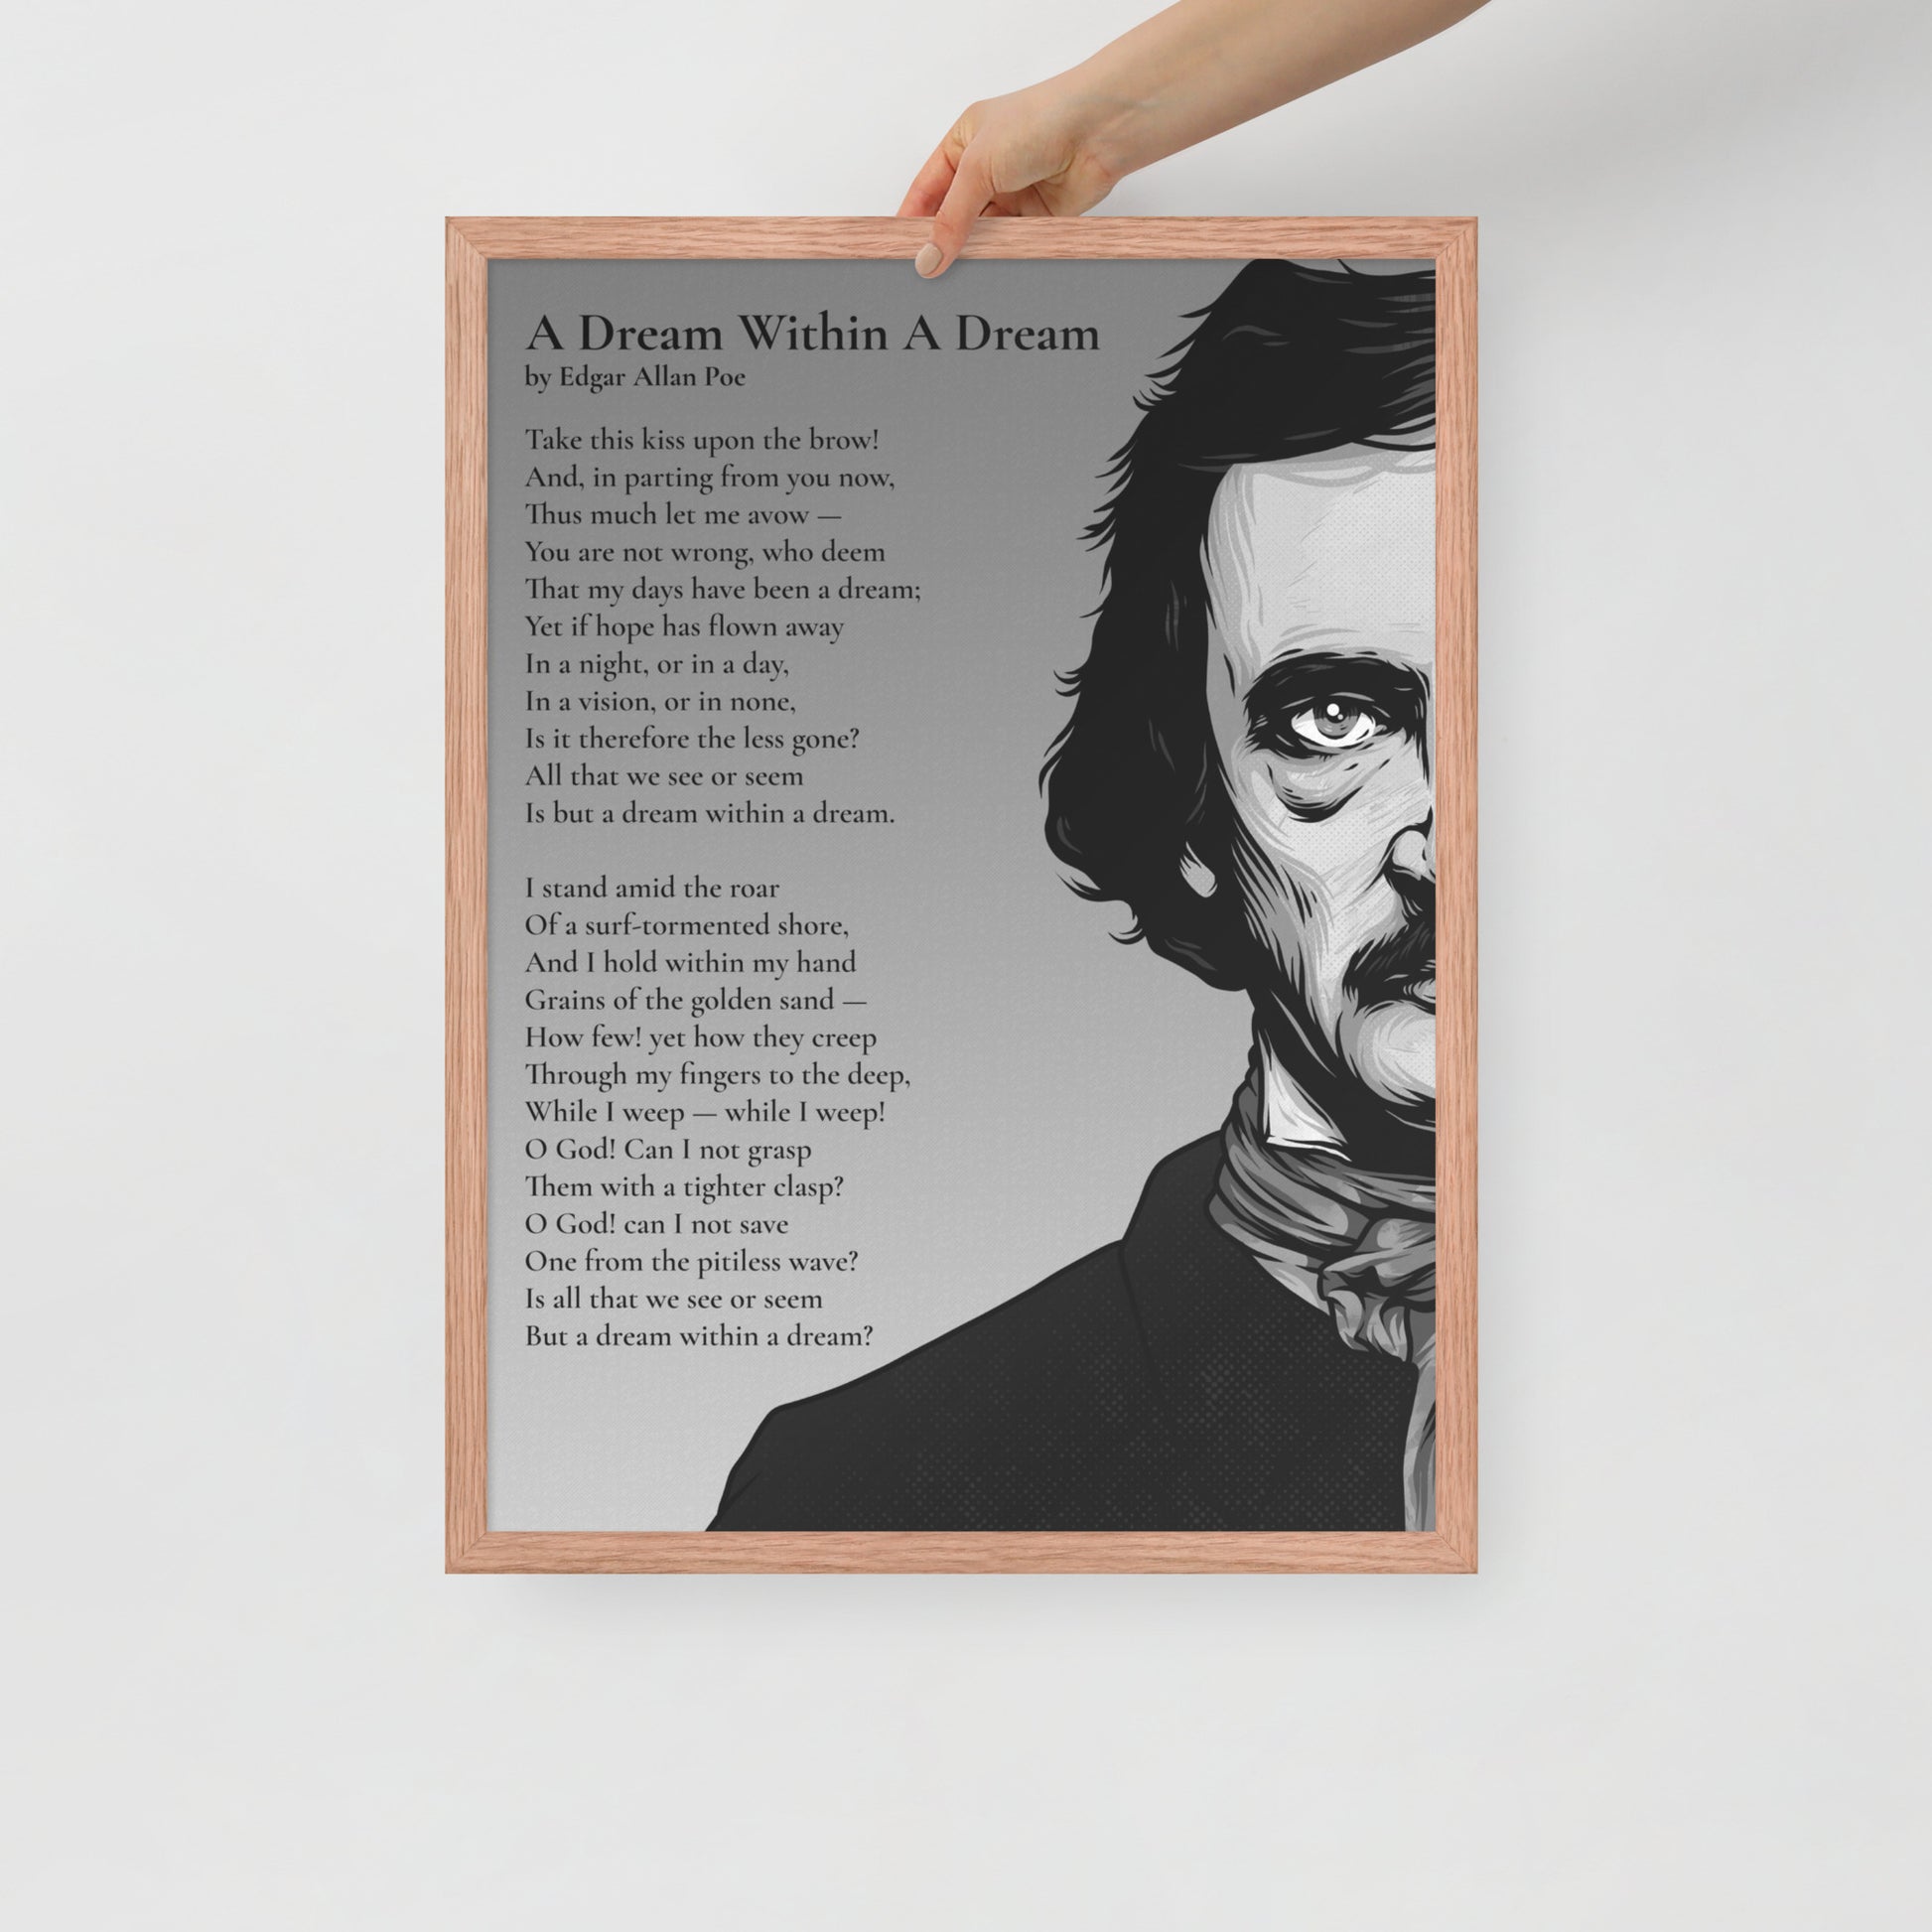 Edgar Allan Poe's 'A Dream Within a Dream' Framed Matted Poster - 18 x 24 Red Oak Frame